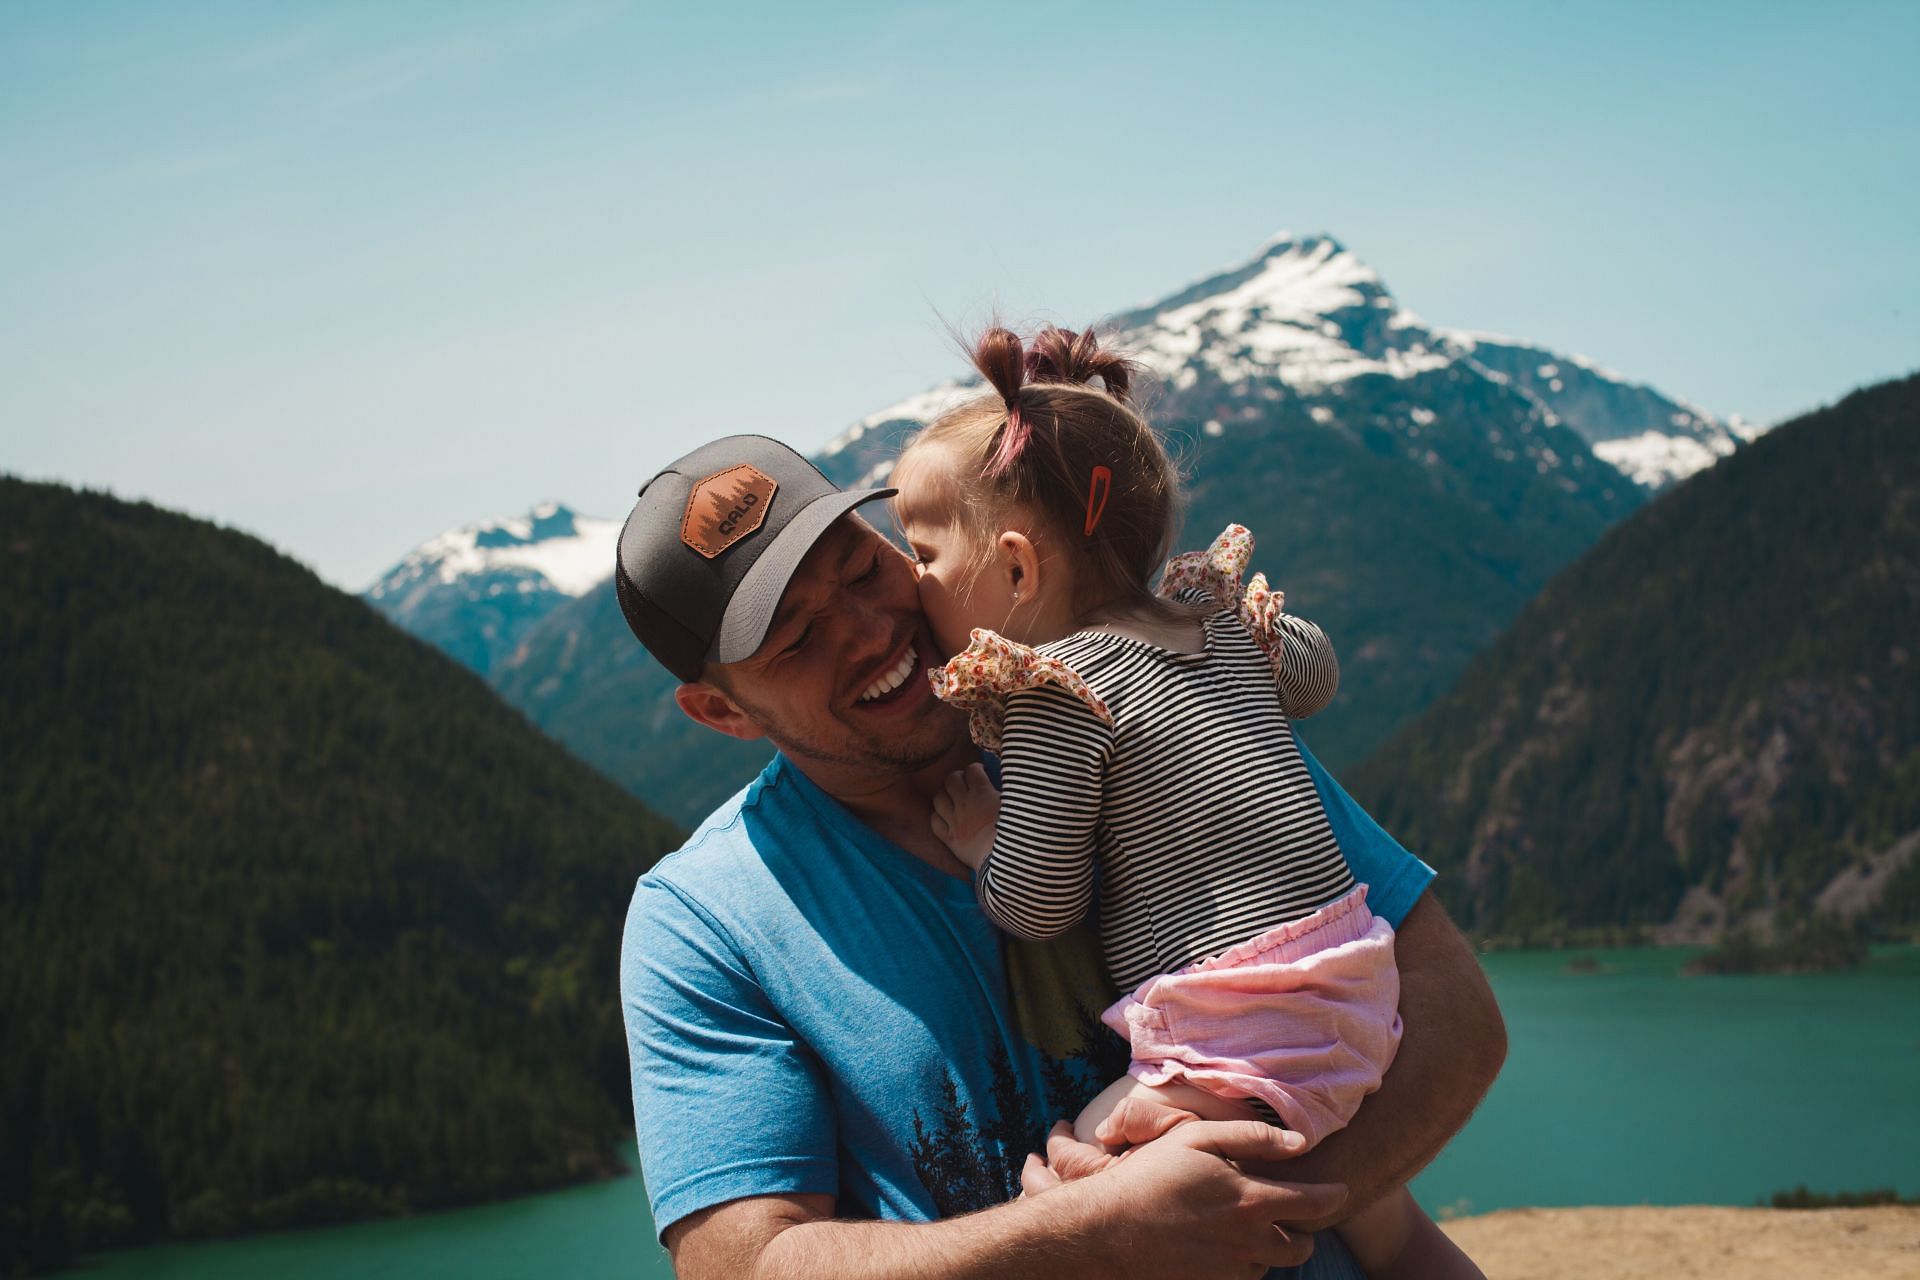 A hike with your loved ones can enhance your mood instantly. (Photo via Pexels/Josh Willink)